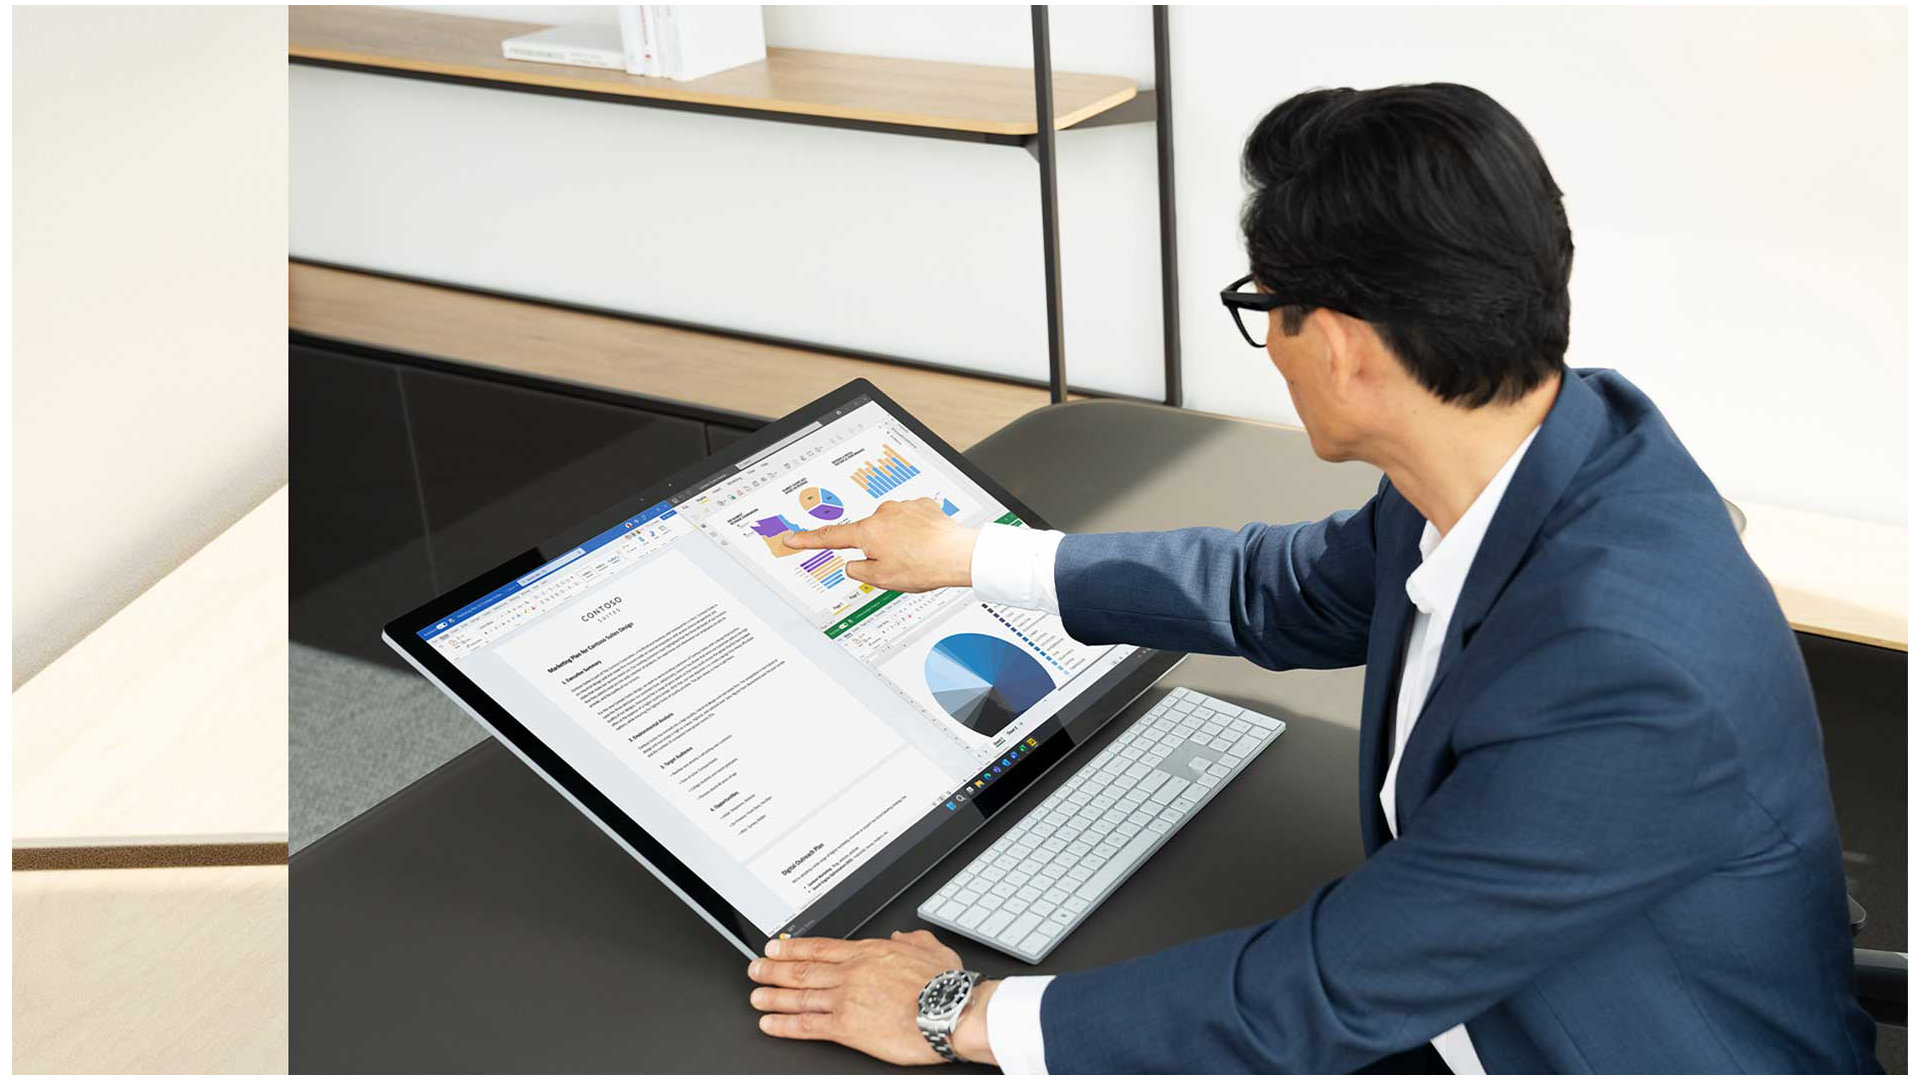 A person uses the touchscreen to interact with their Surface Studio 2+ device